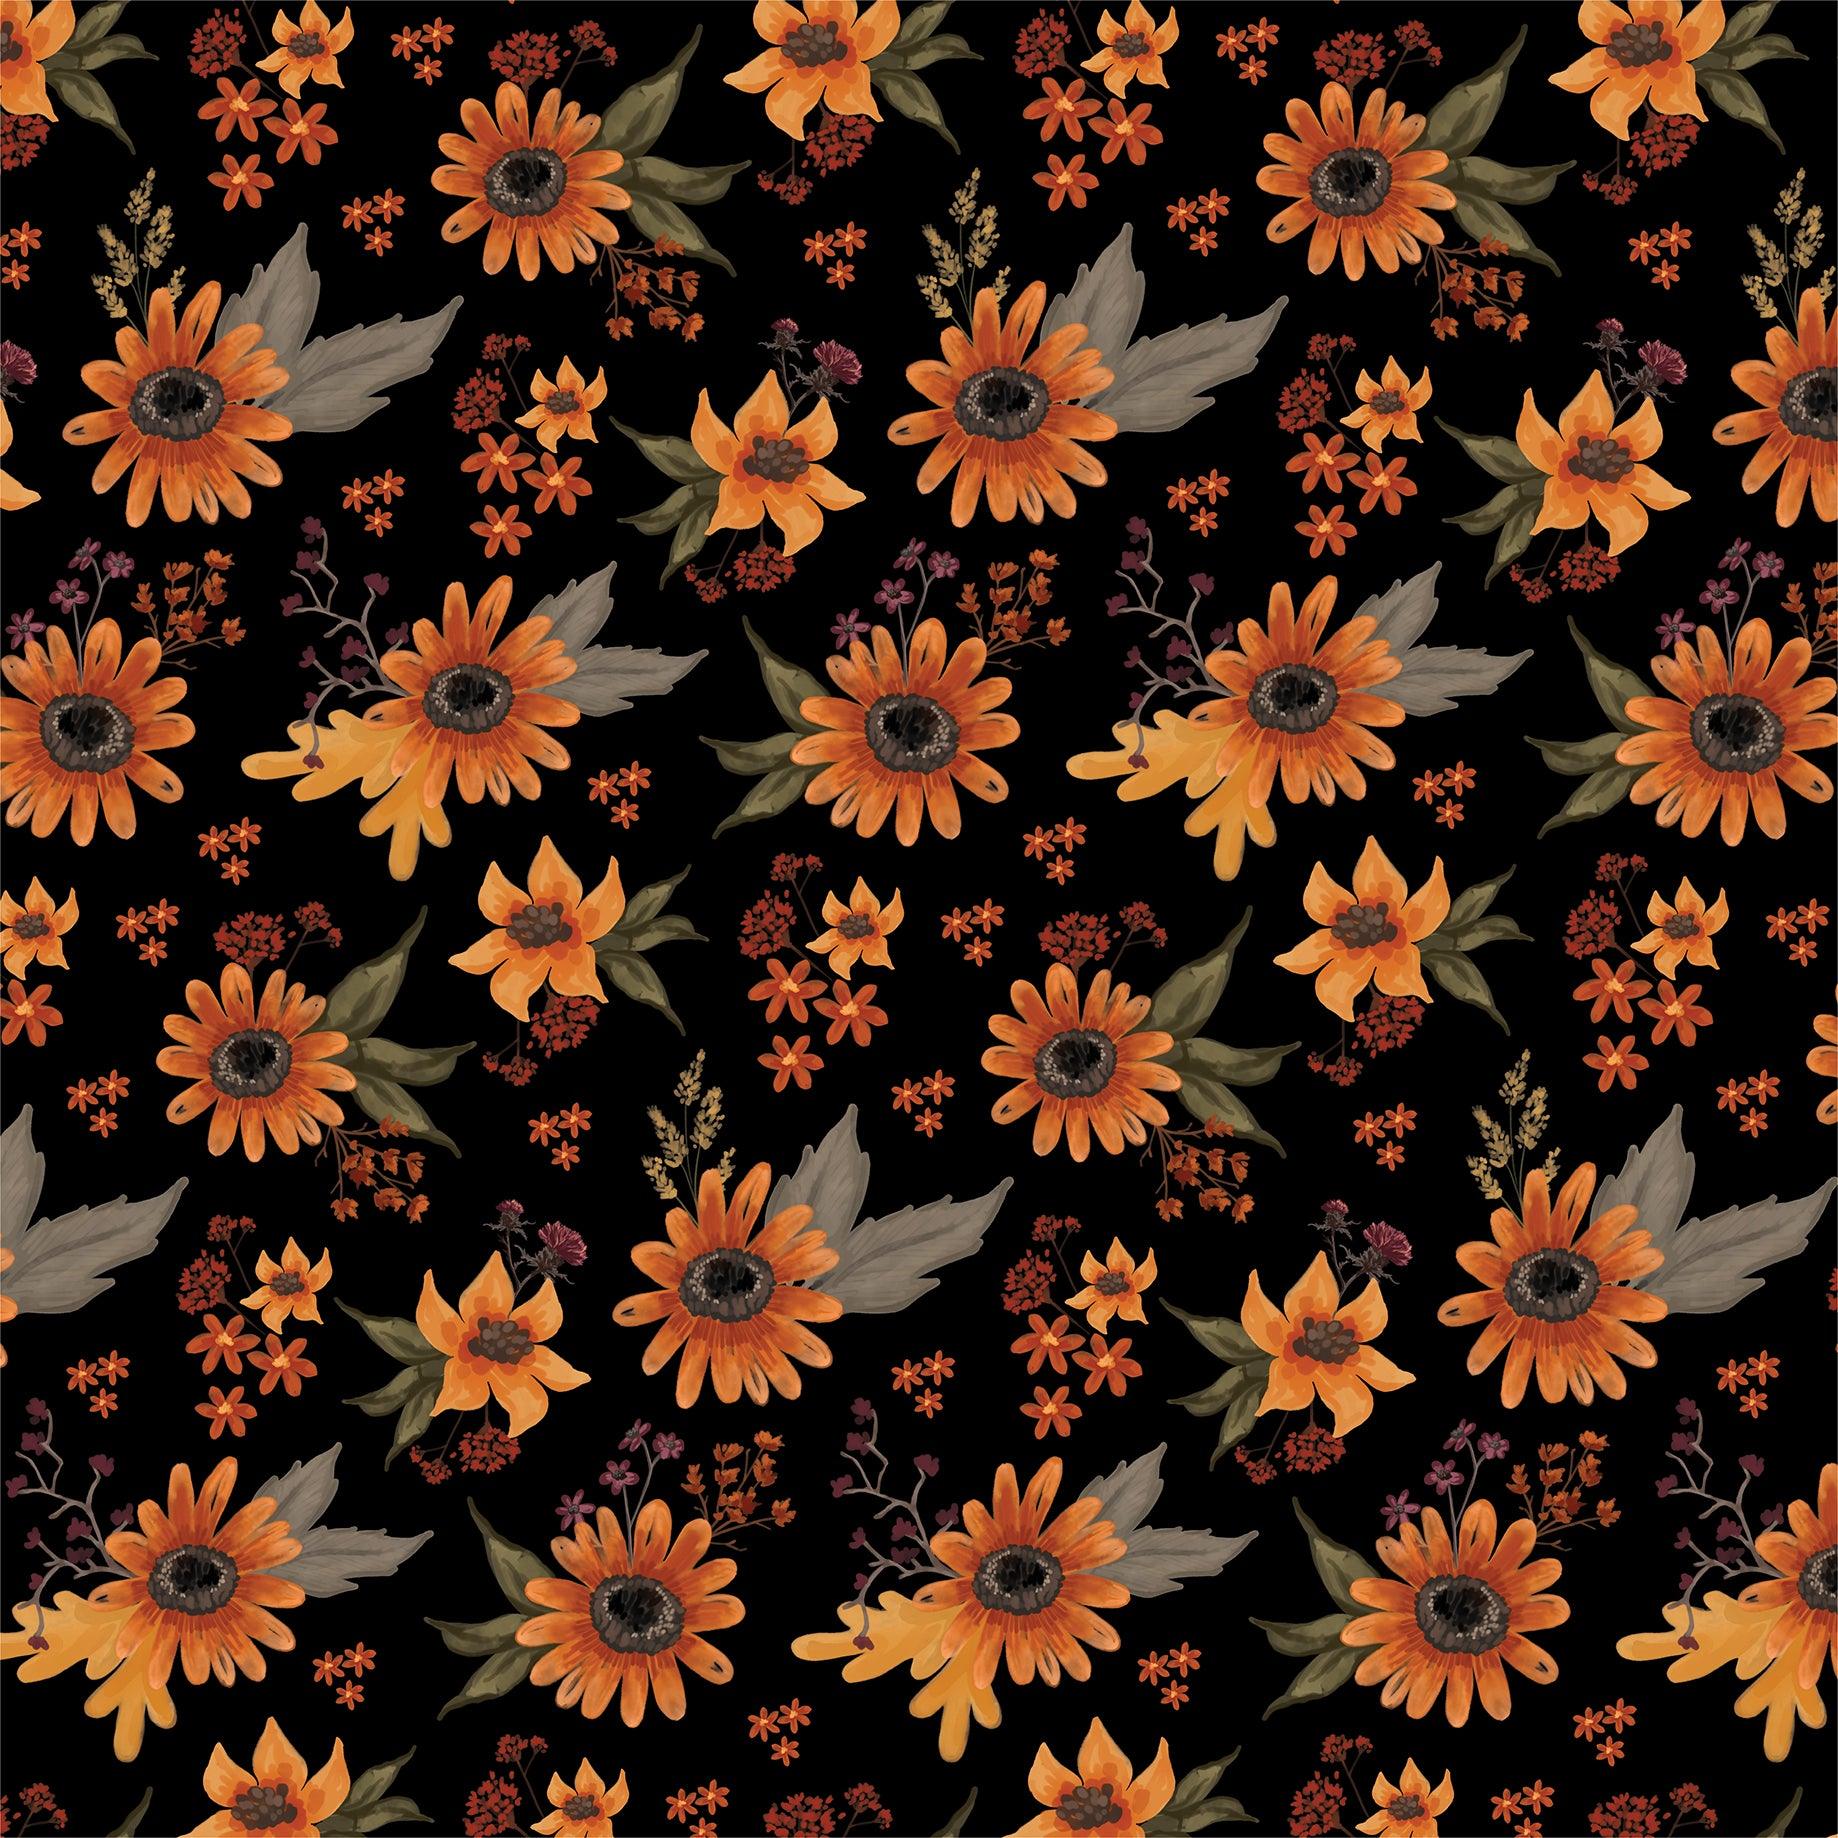 Halloween Collection Spooked Sunflowers 12 x 12 Double-Sided Scrapbook Paper by Carta Bella - Scrapbook Supply Companies